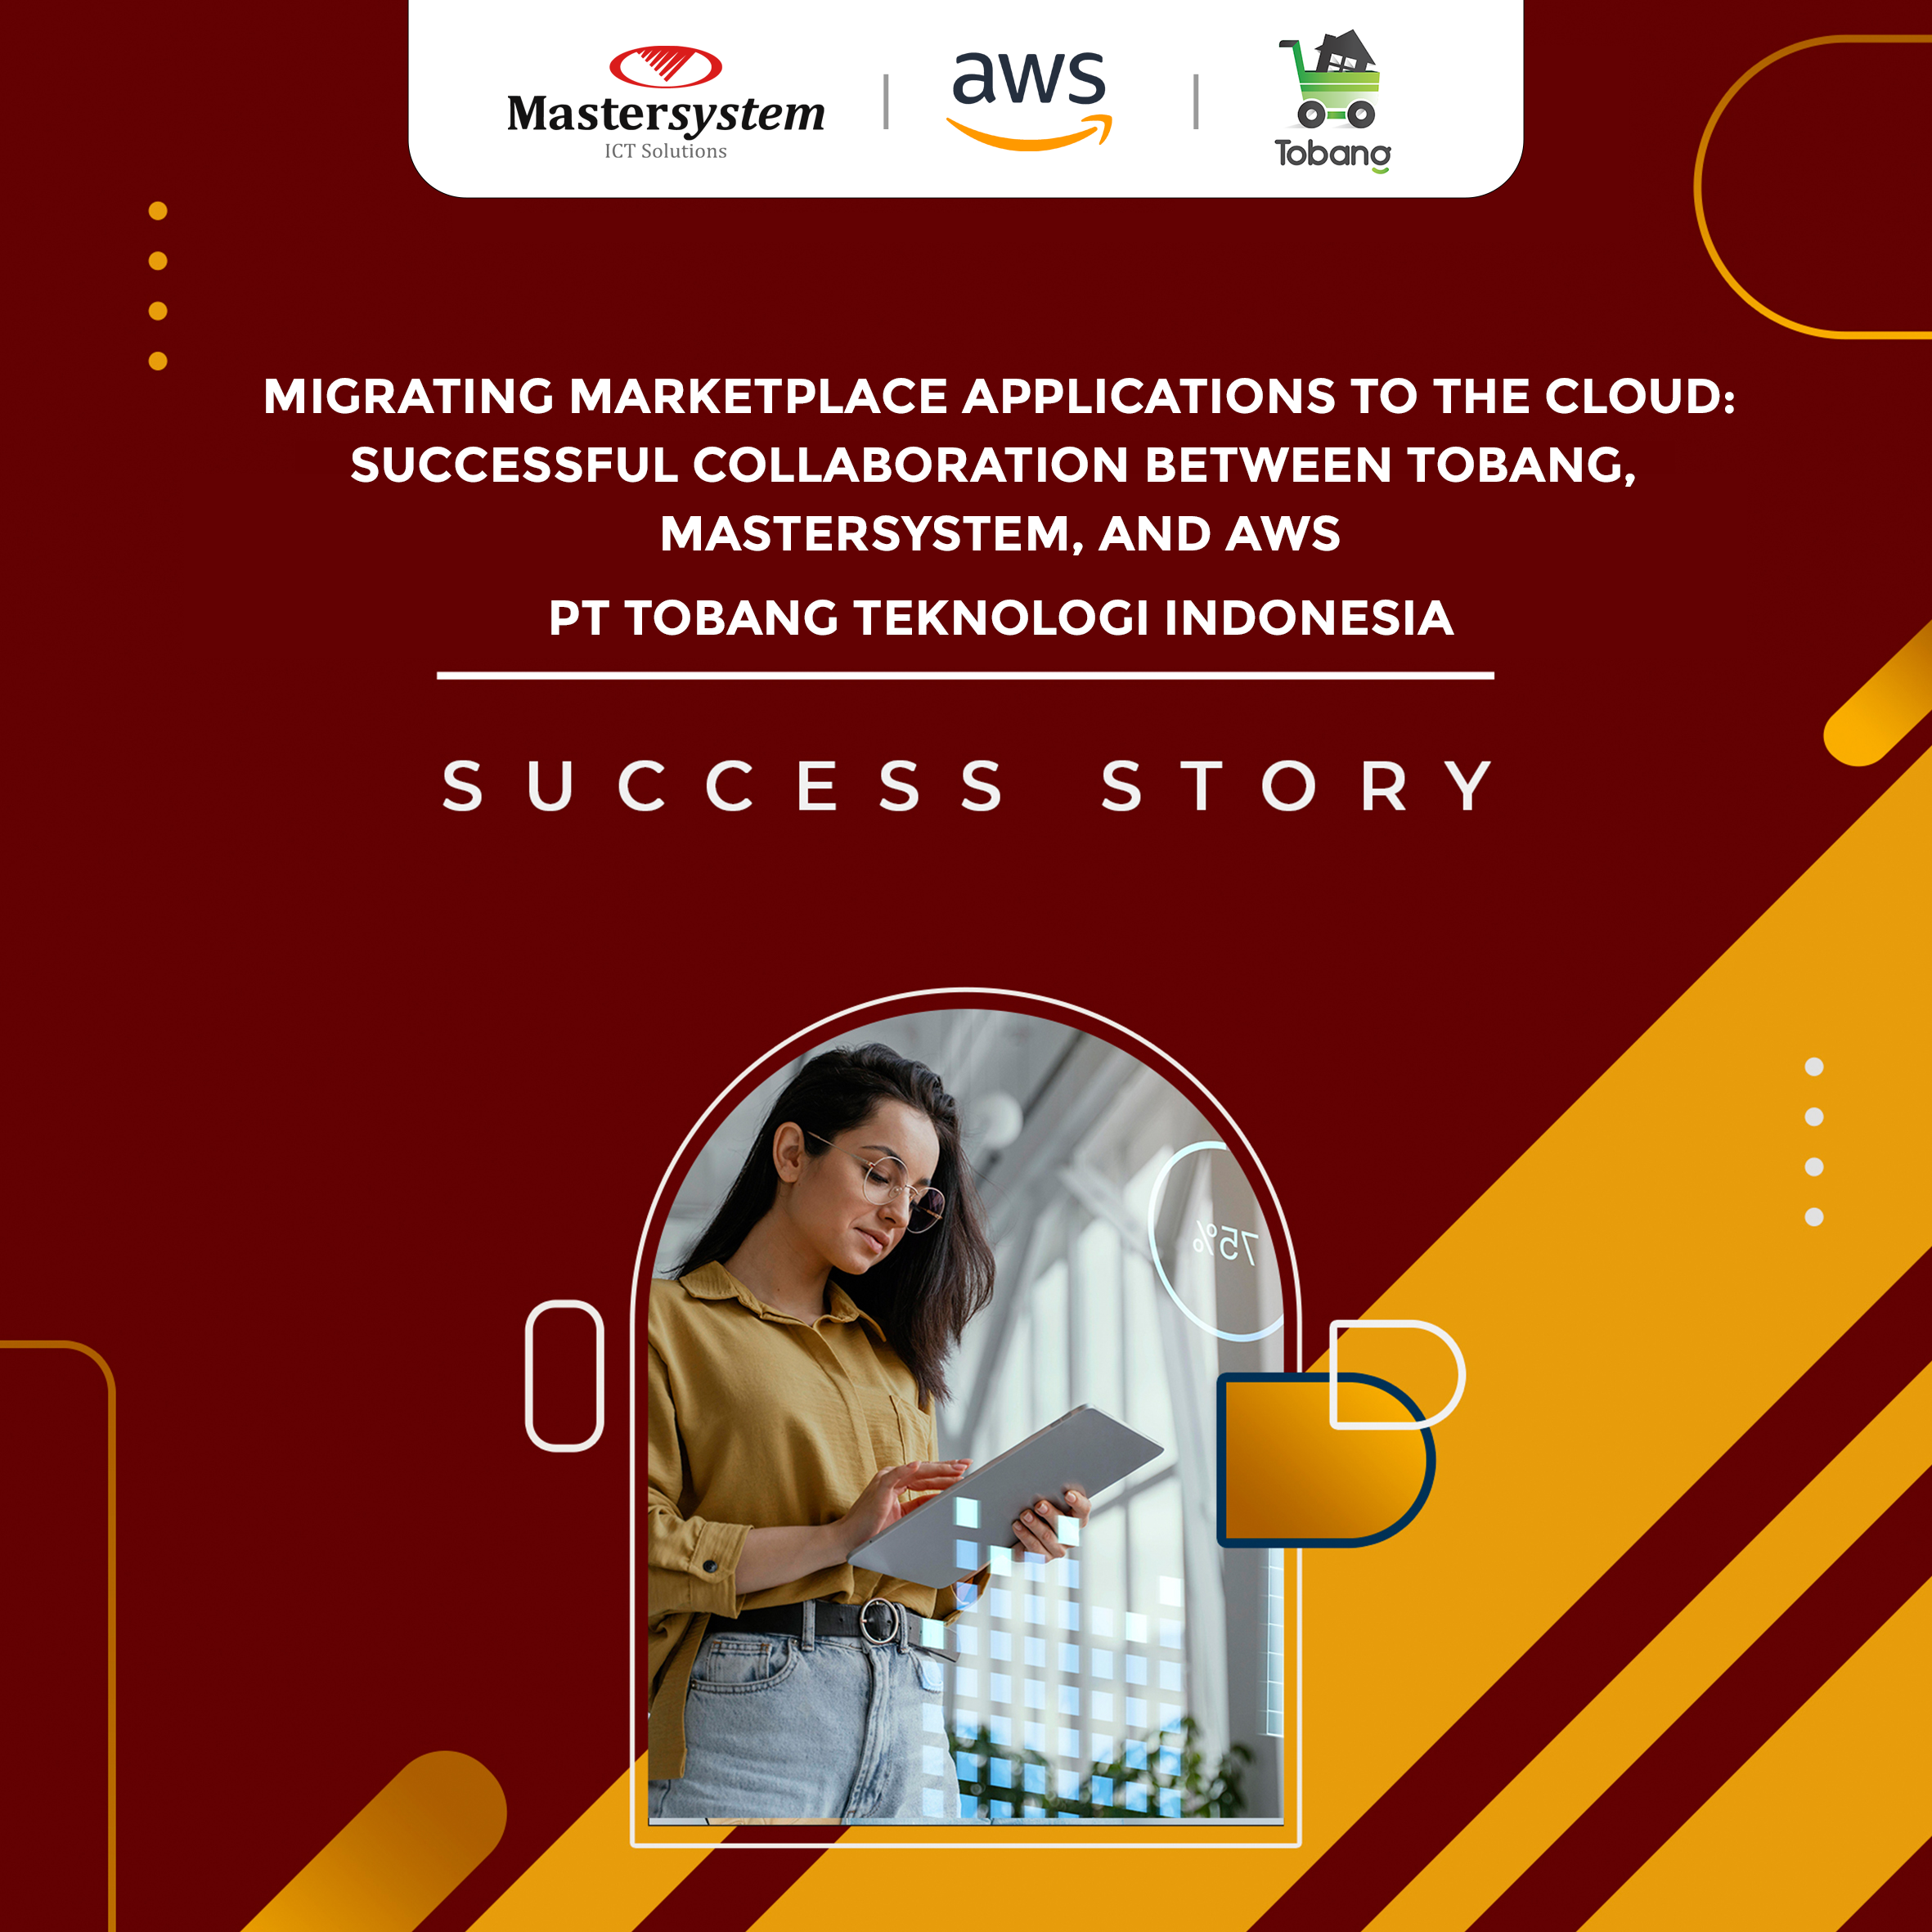 Migrating Marketplace Applications to the Cloud: Successful Collaboration between PT Tobang, Mastersystem, and AWS